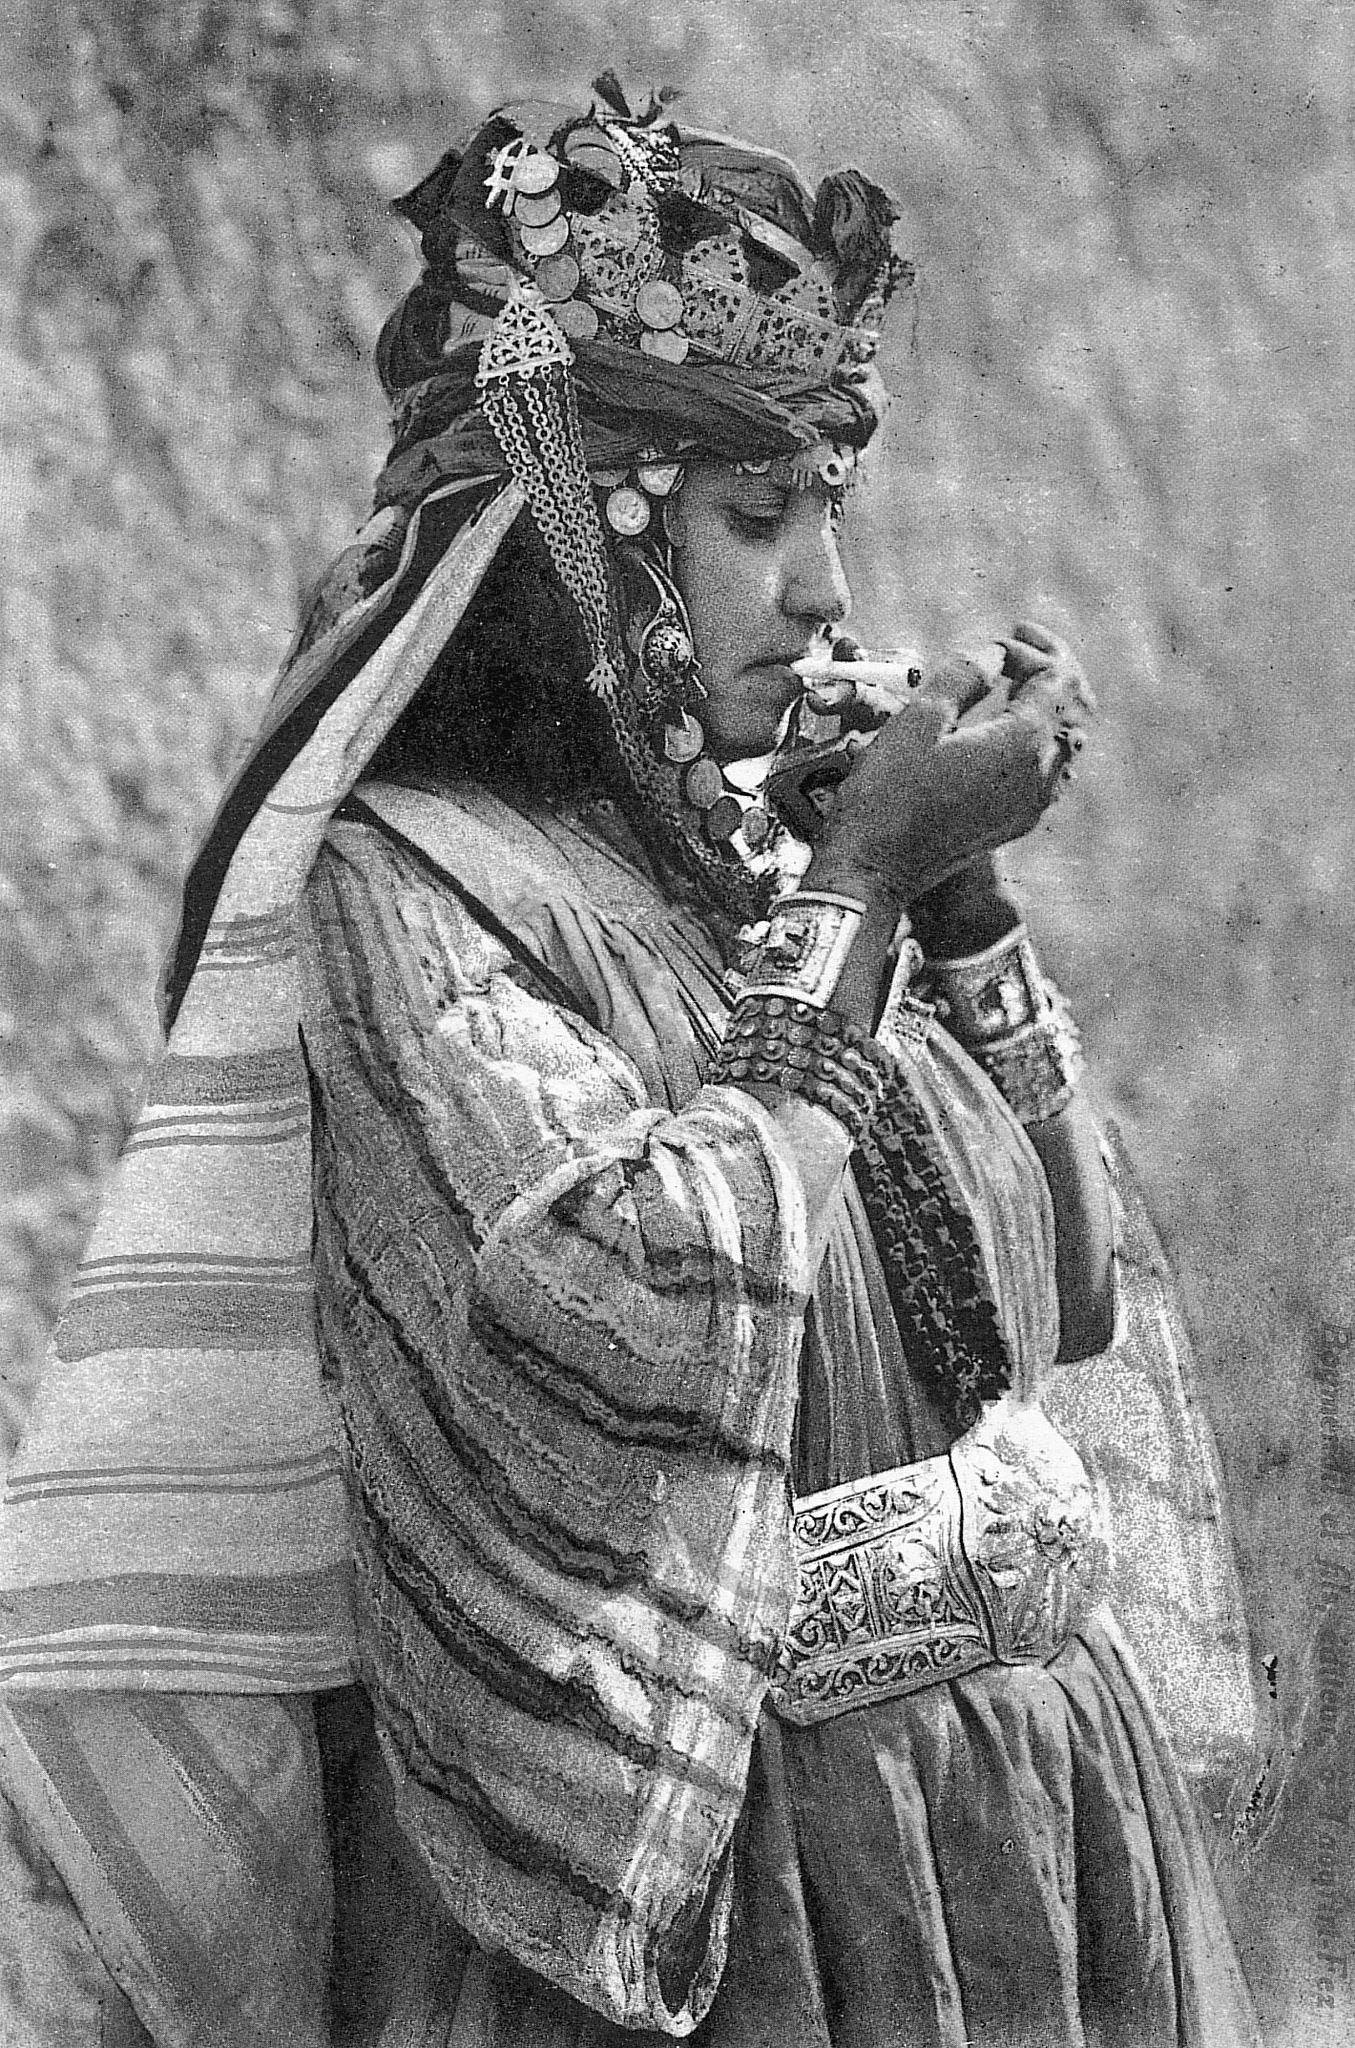 Traditional dressed Moroccan woman smoking a cigarette, 1930.